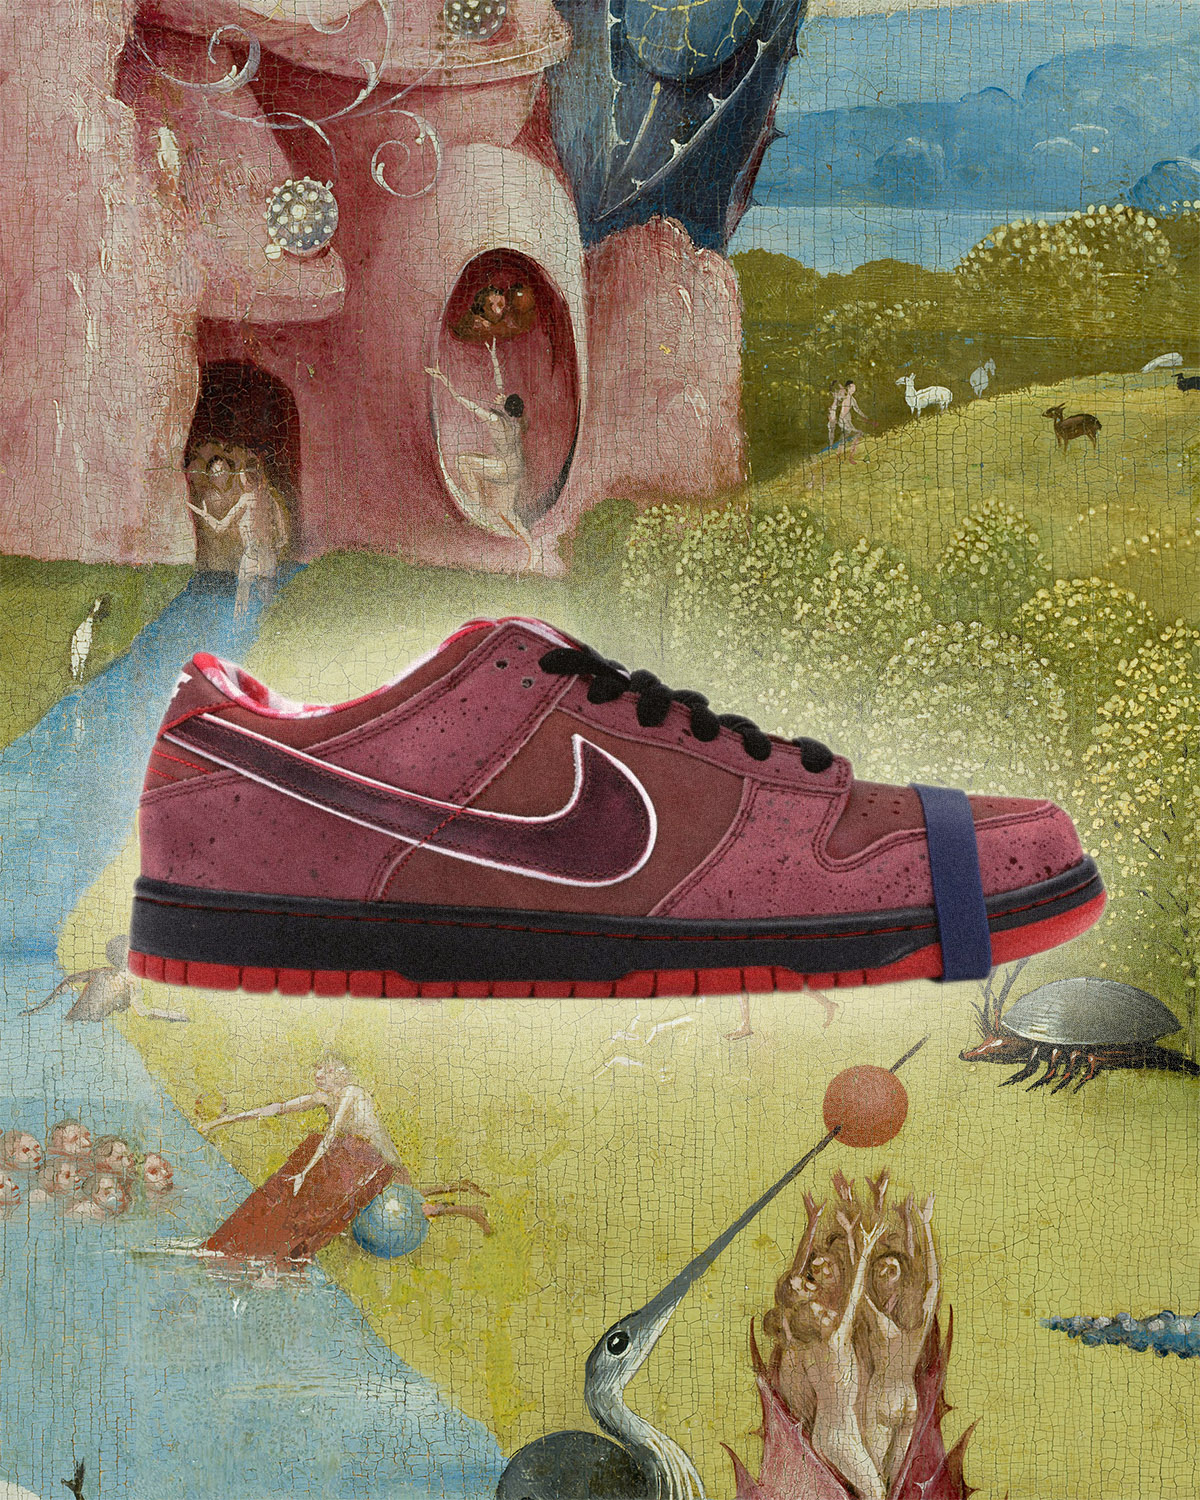 CNCPTS Nike SB Dunk Lobster History - A Sight to Sea!